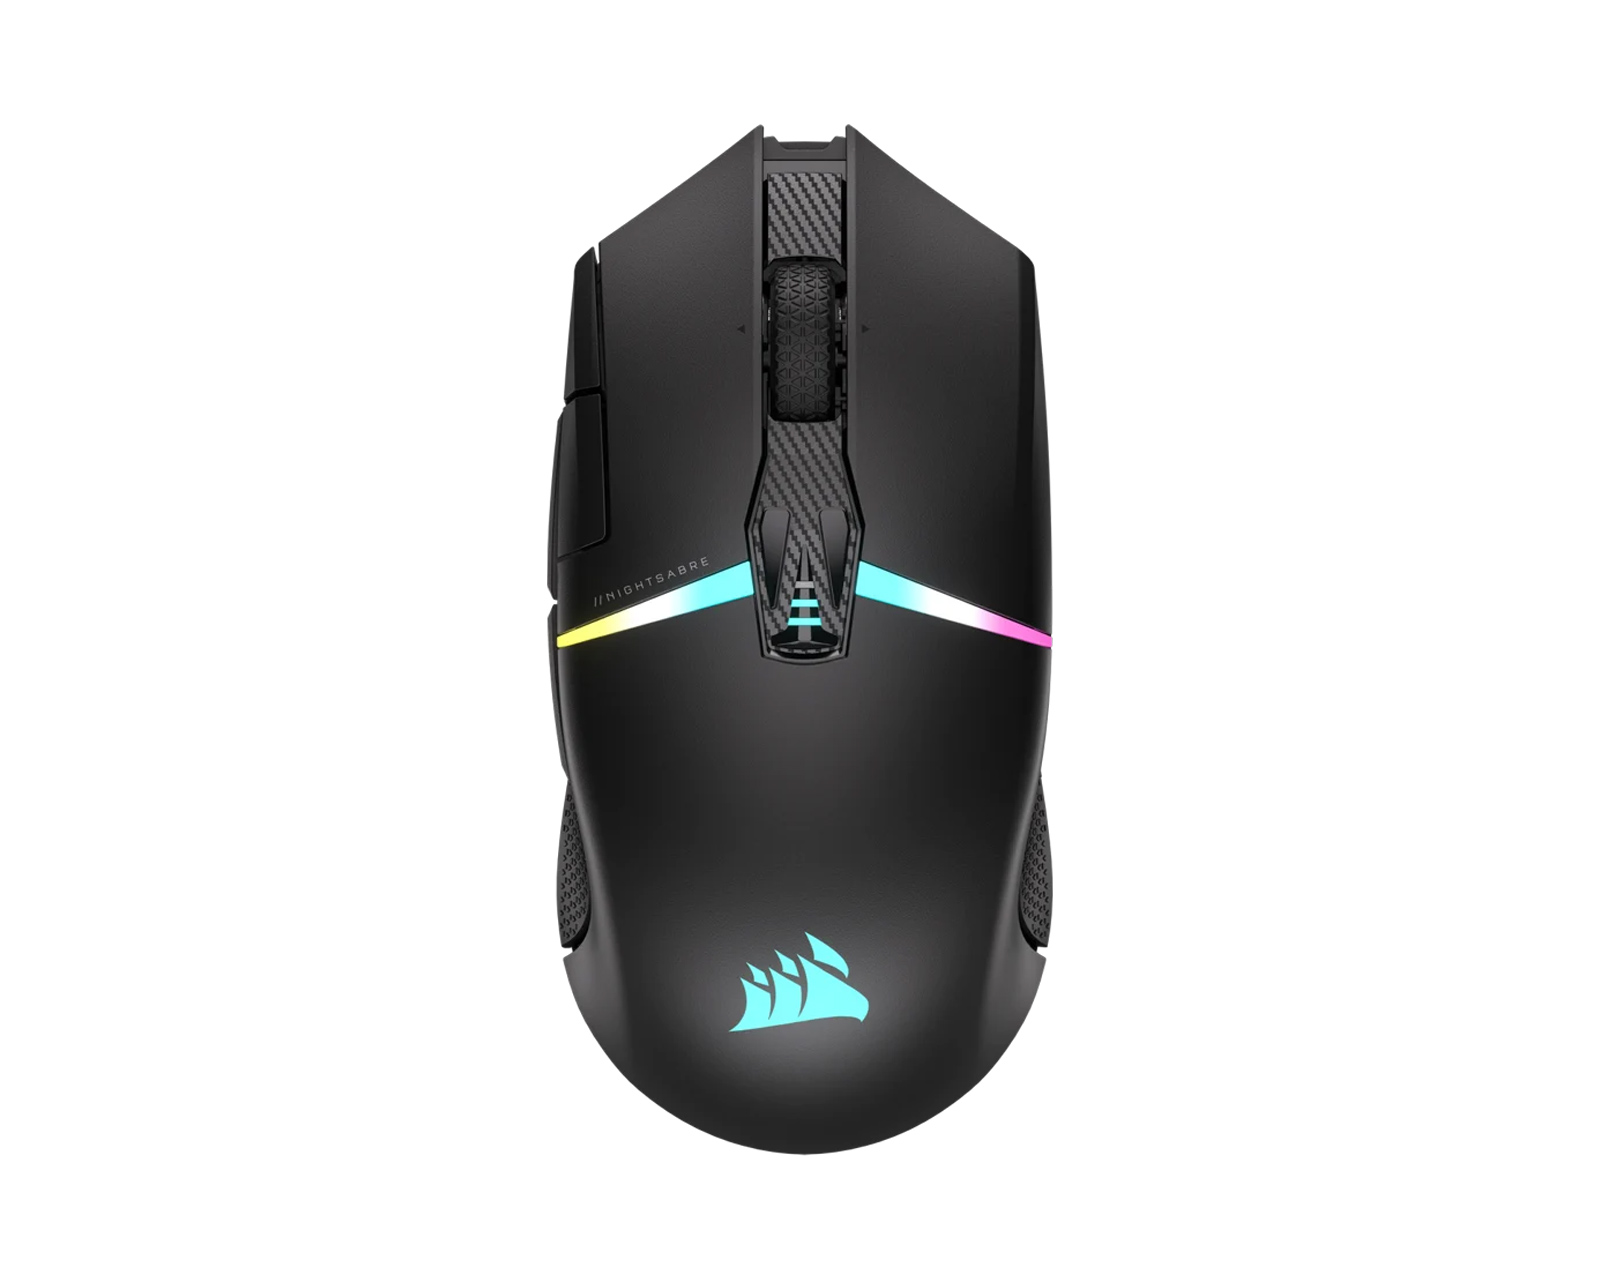 Corsair Nightsabre Wireless mouse review